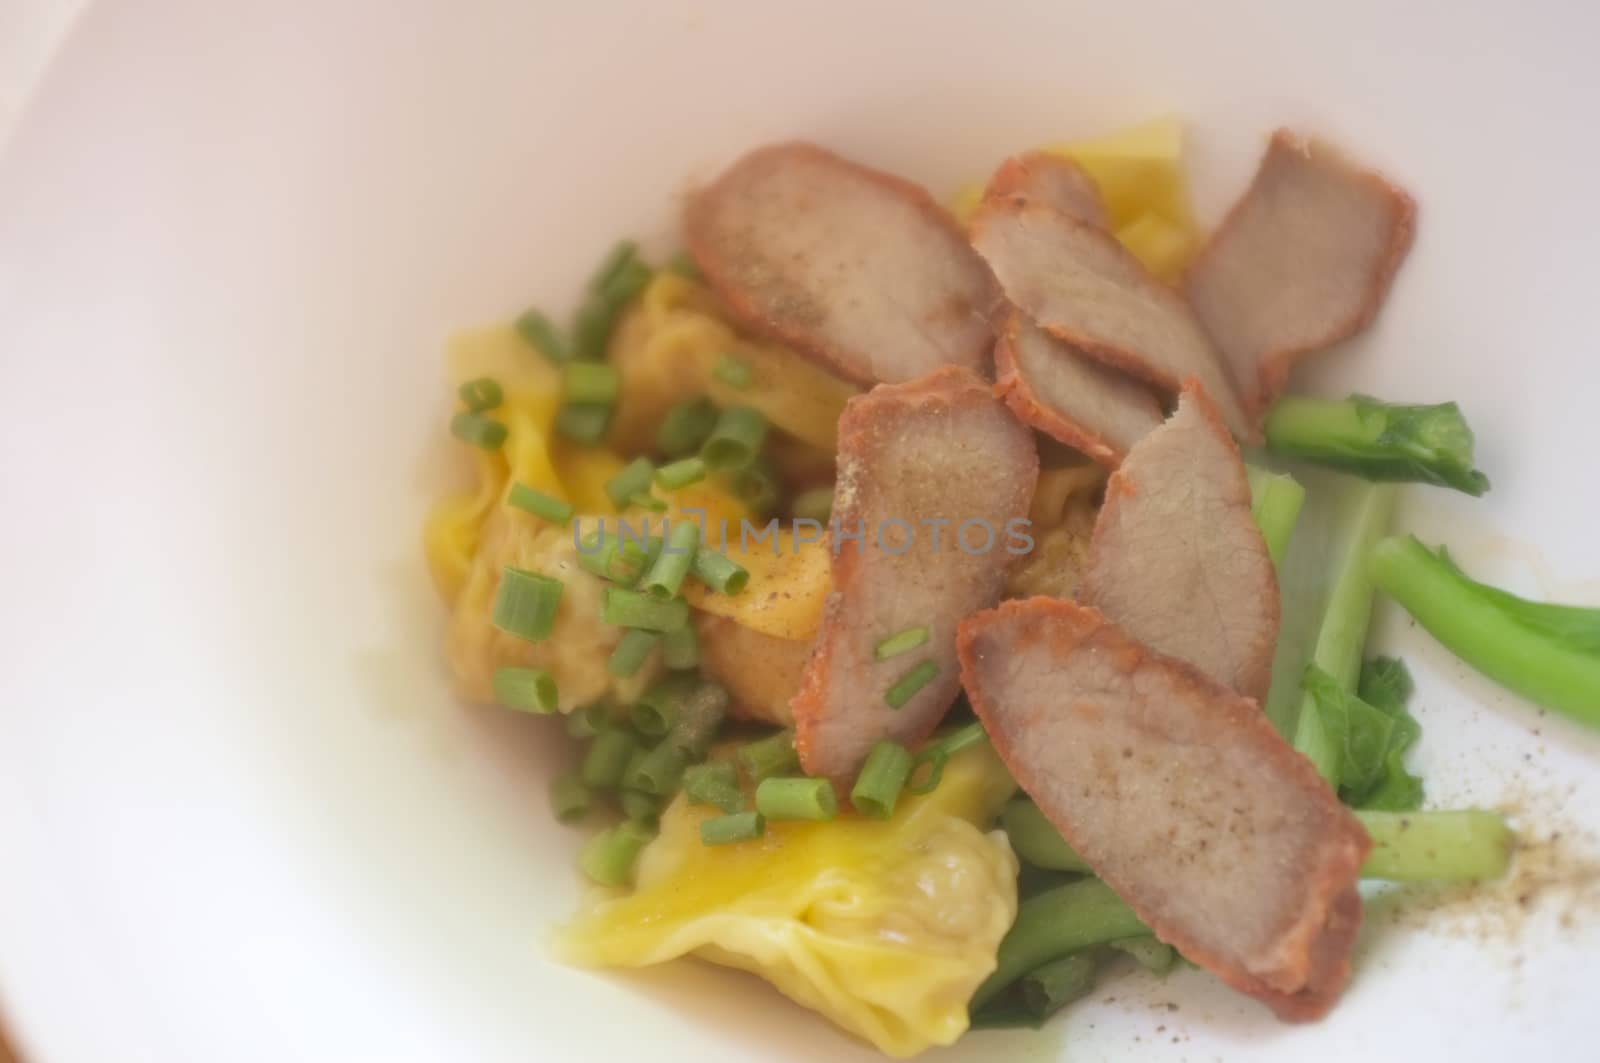 Wantan egg noodles and sliced roasted red pork . Asian street food   by Hepjam